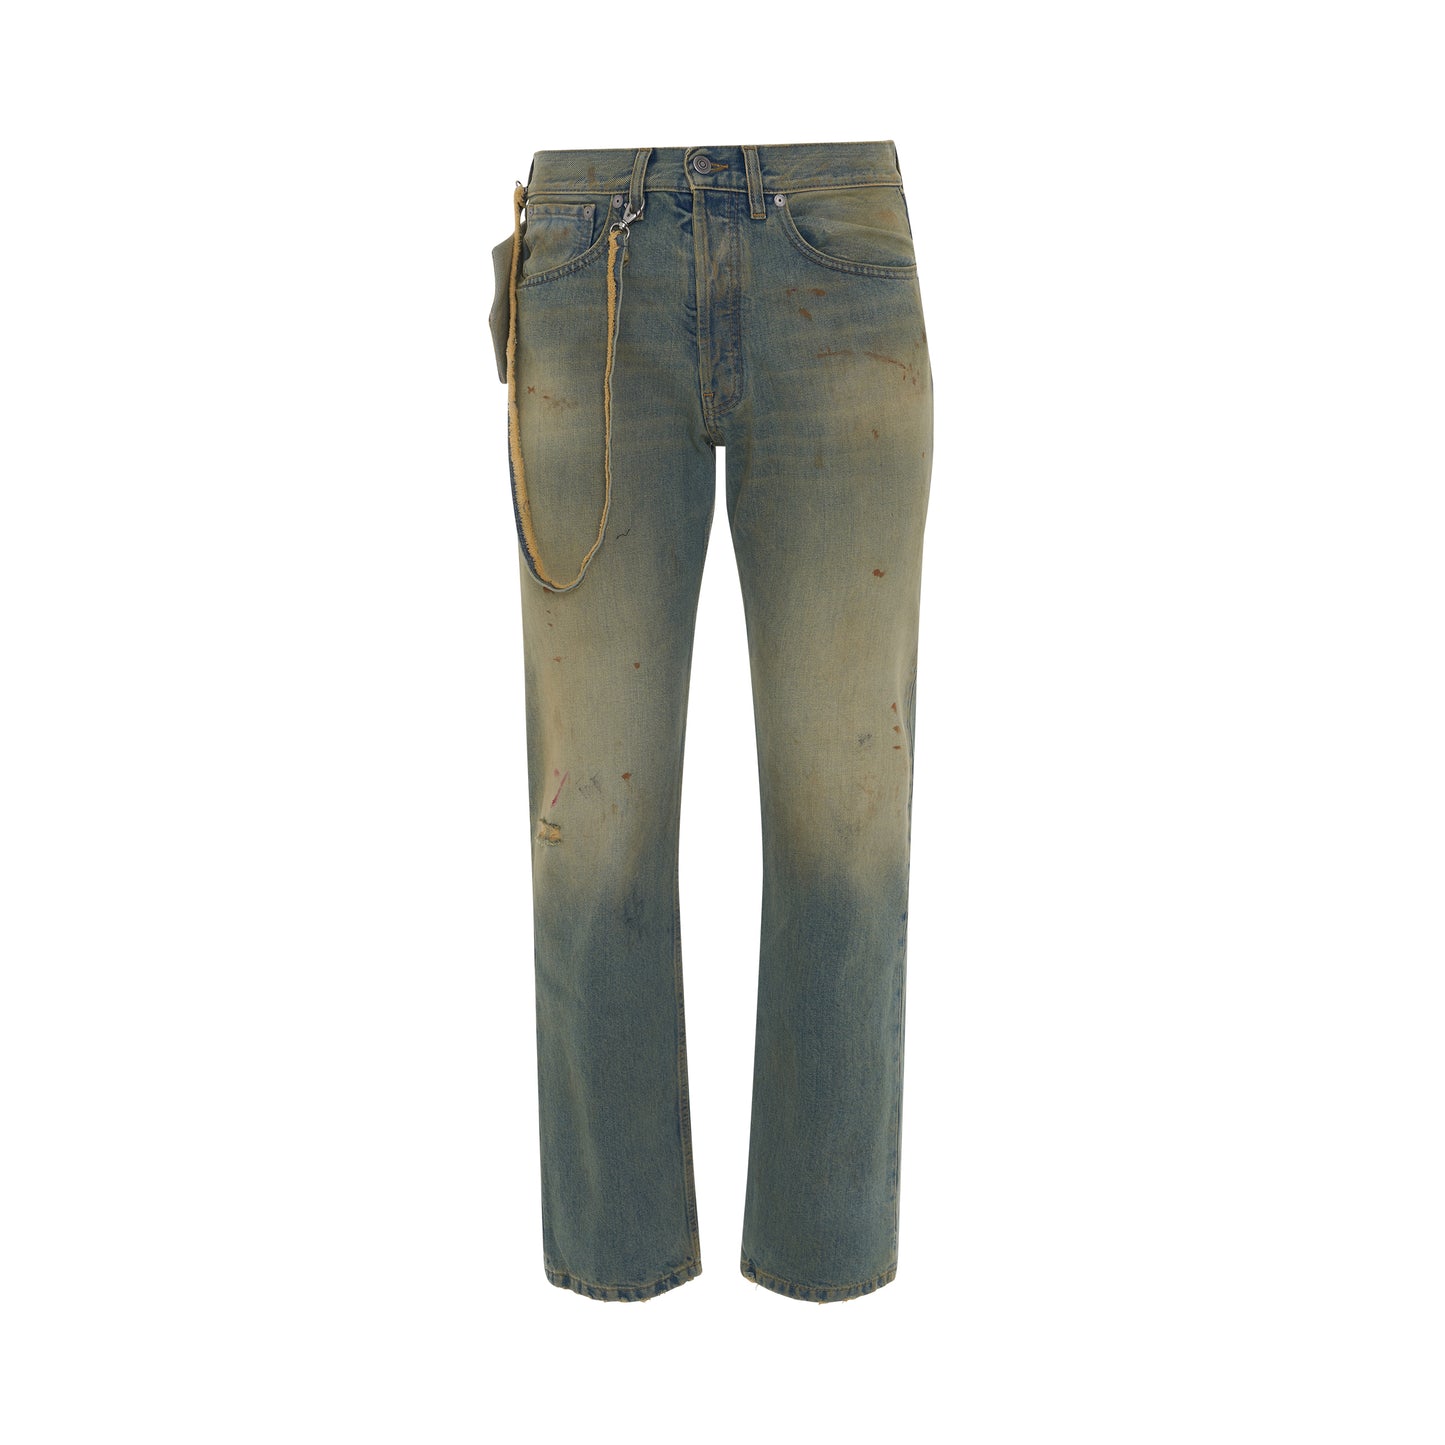 5 Pockets Slim Jeans in Dirty Wash